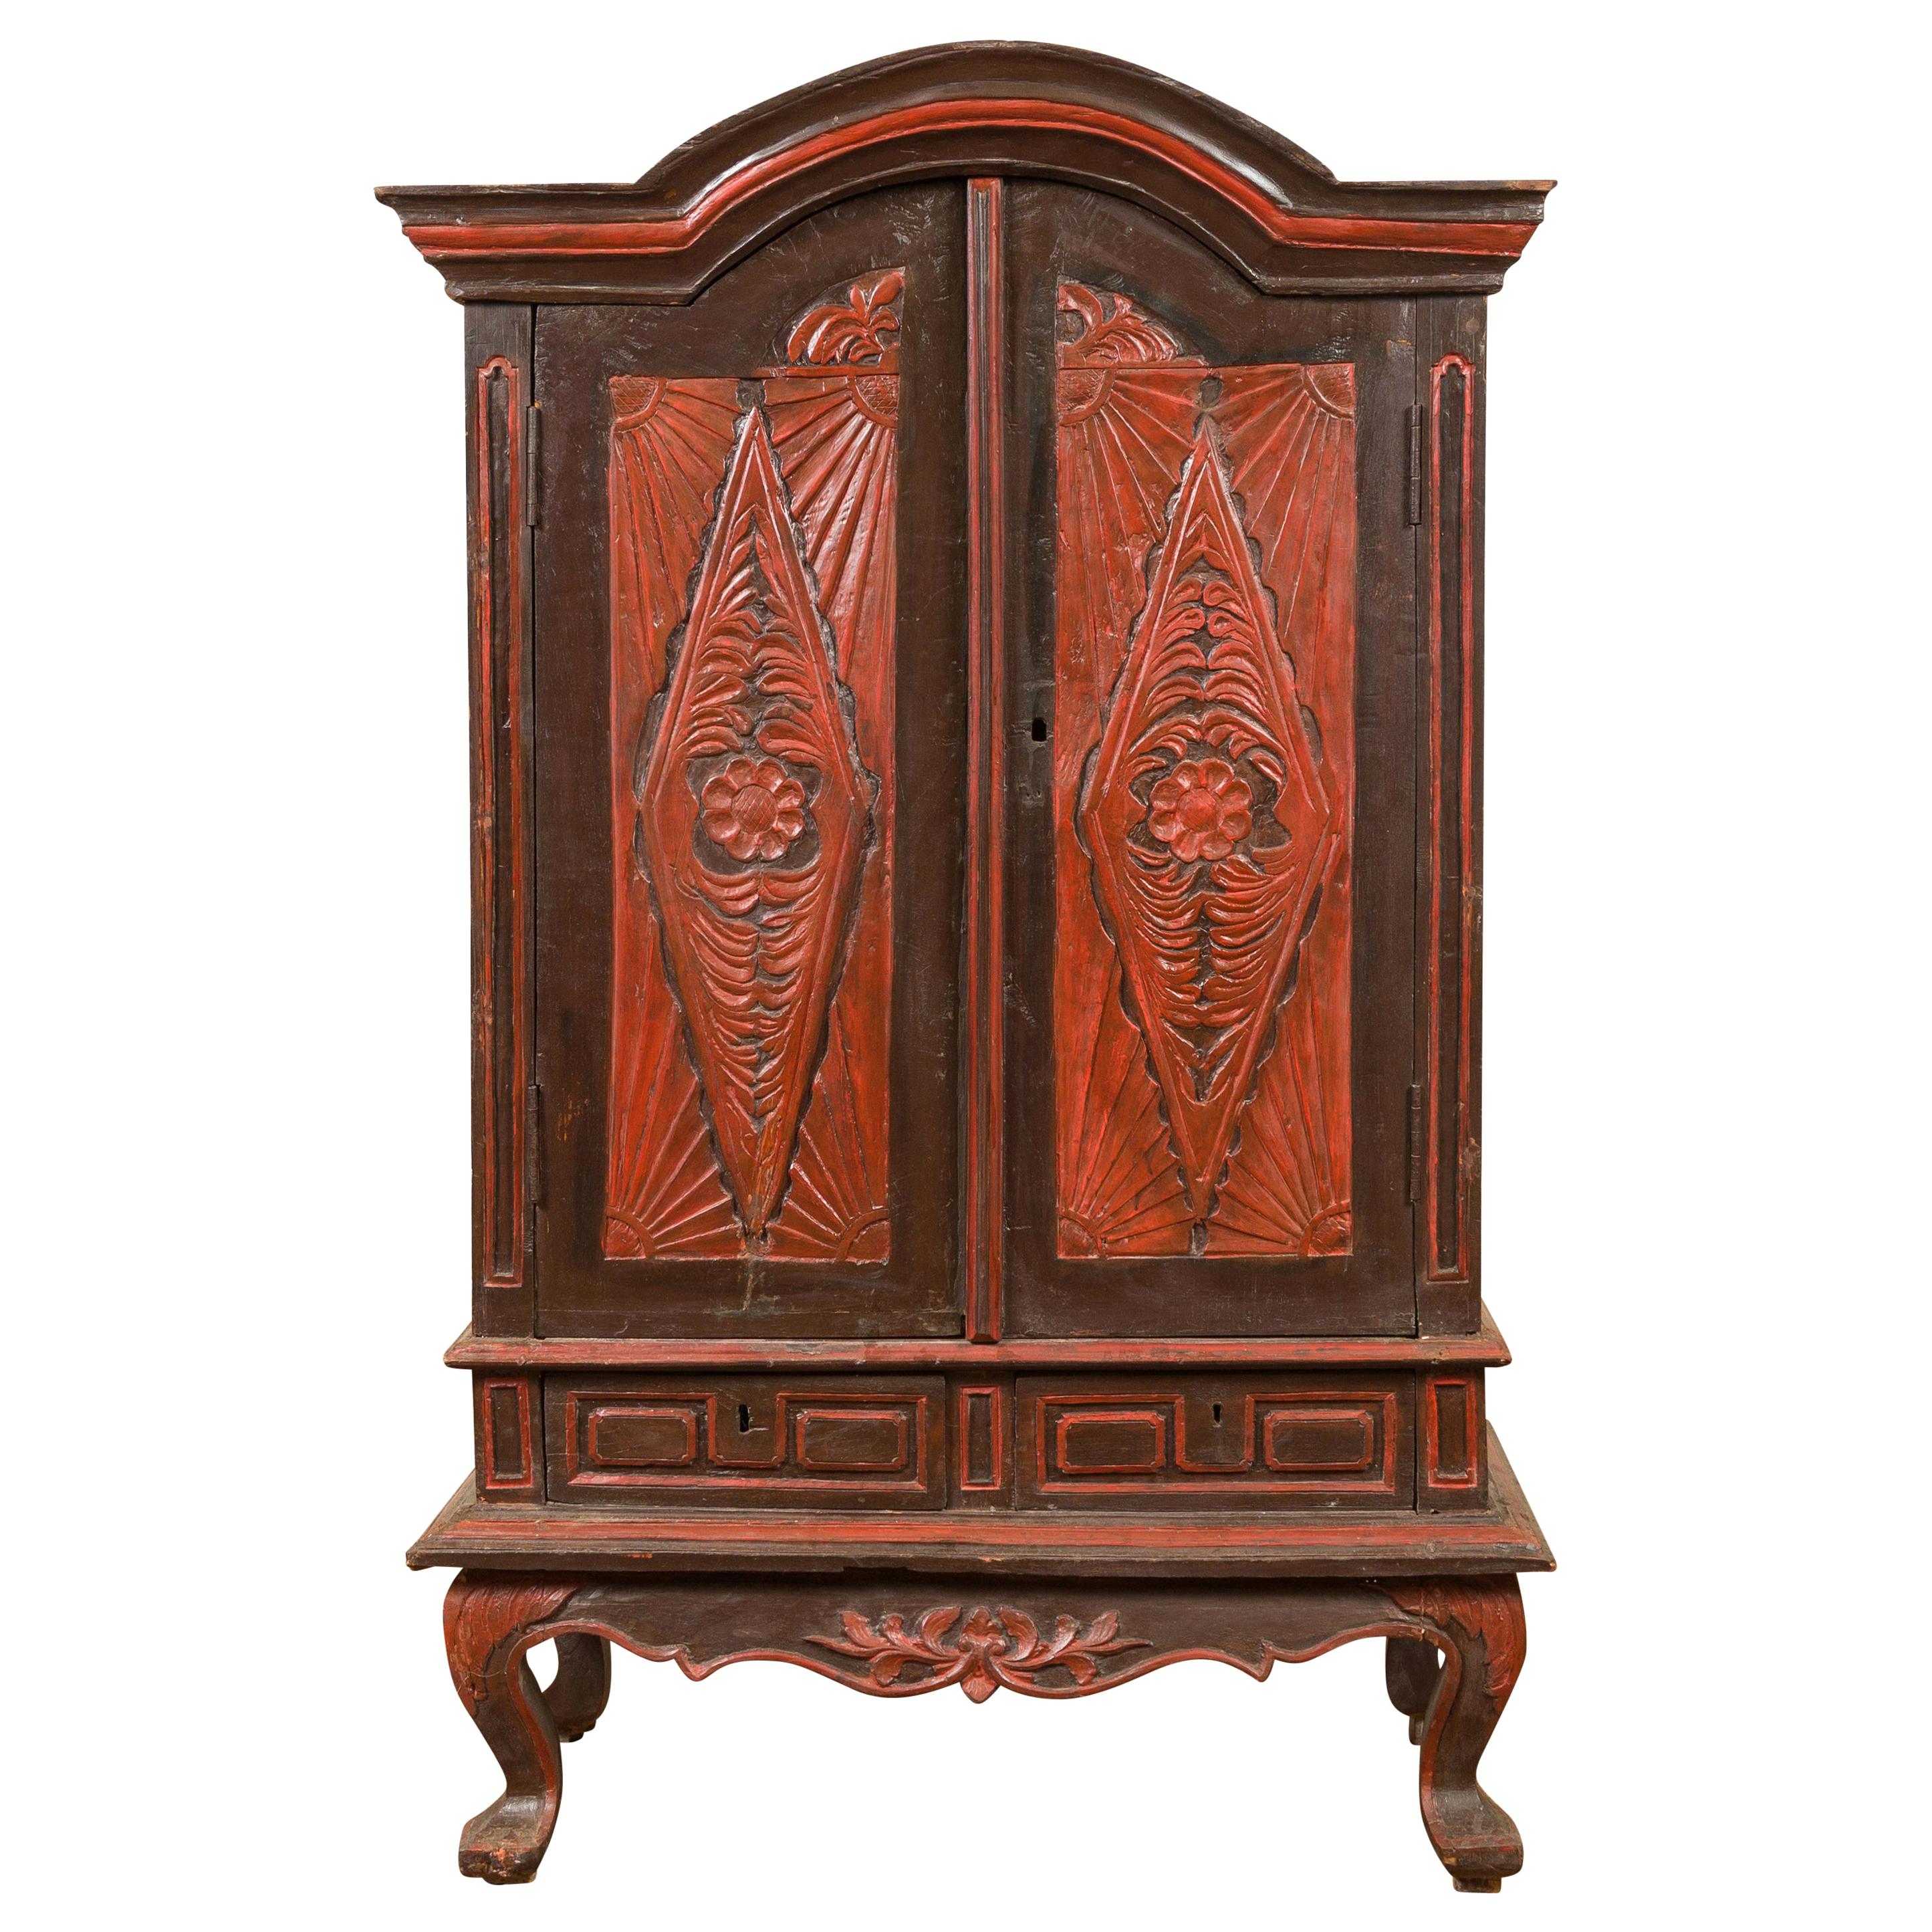 Dutch Colonial Late 19th Century Bonnet Top Cabinet with Carved Doors and Apron